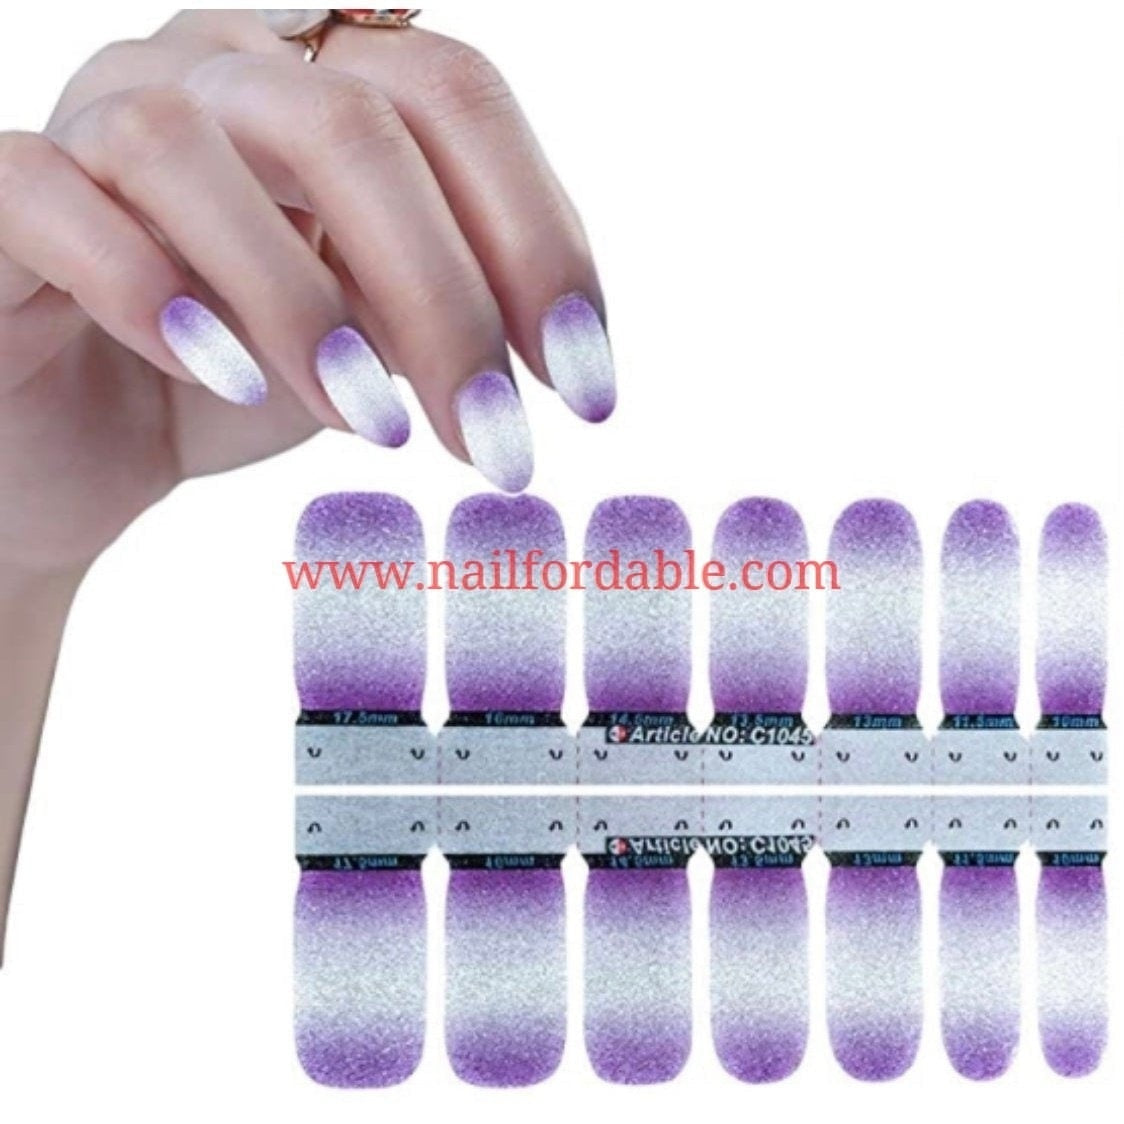 Purple to Silver Nail Wraps | Semi Cured Gel Wraps | Gel Nail Wraps |Nail Polish | Nail Stickers